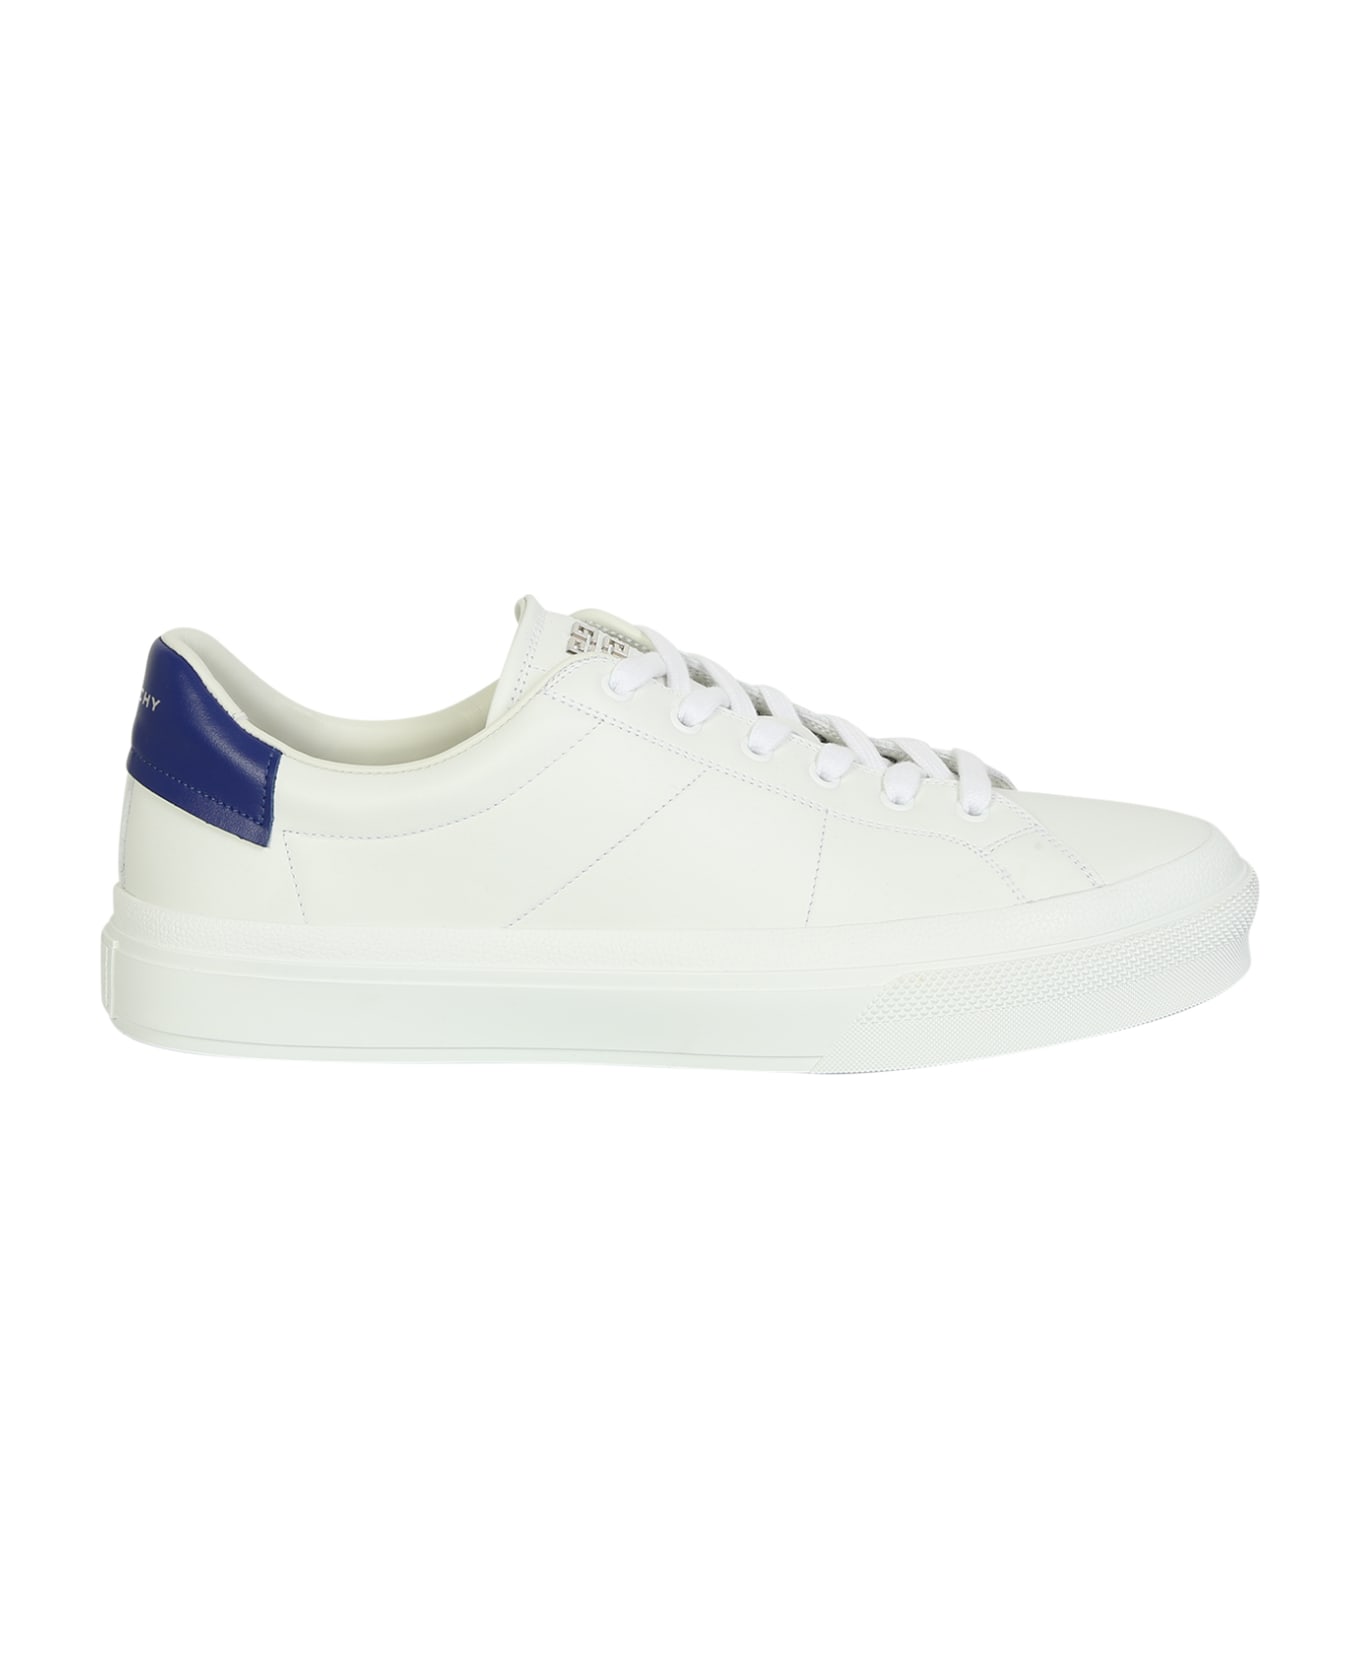 Givenchy City Court Sneakers By Are A Model That Characterizes The New Collection As They Are Inspired By The Tennis Court - White Blue